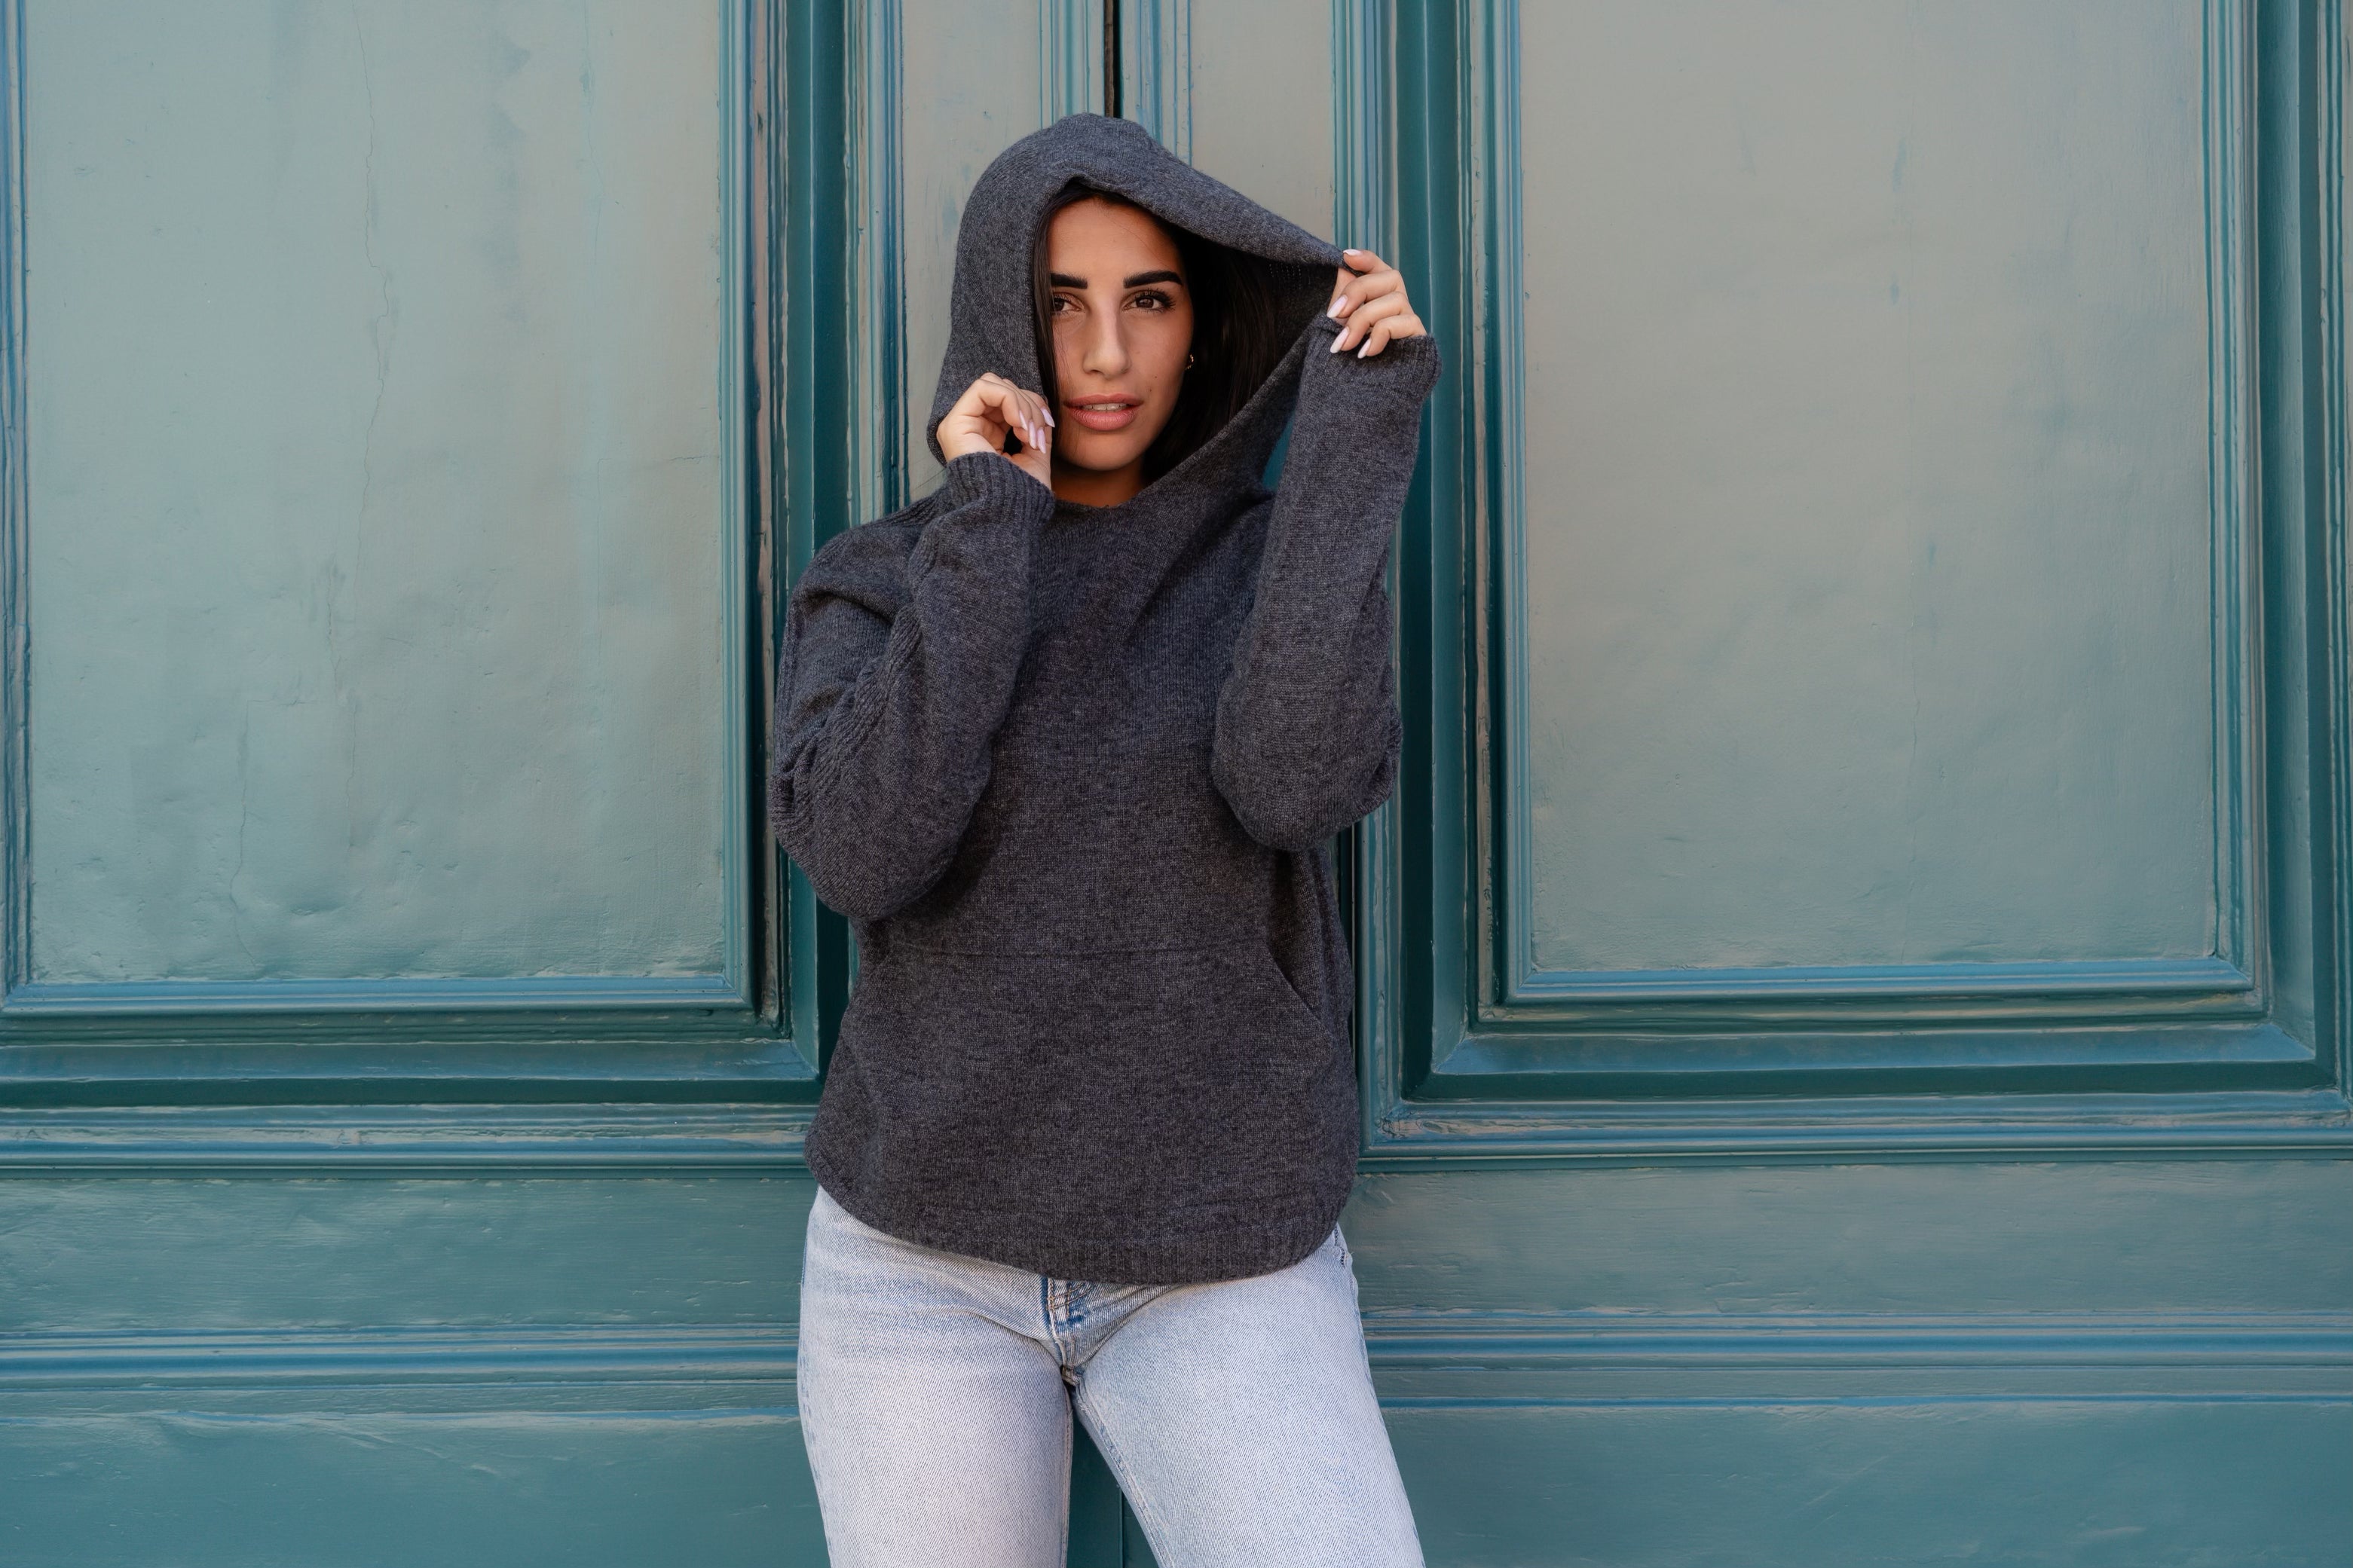 Hooded sweater